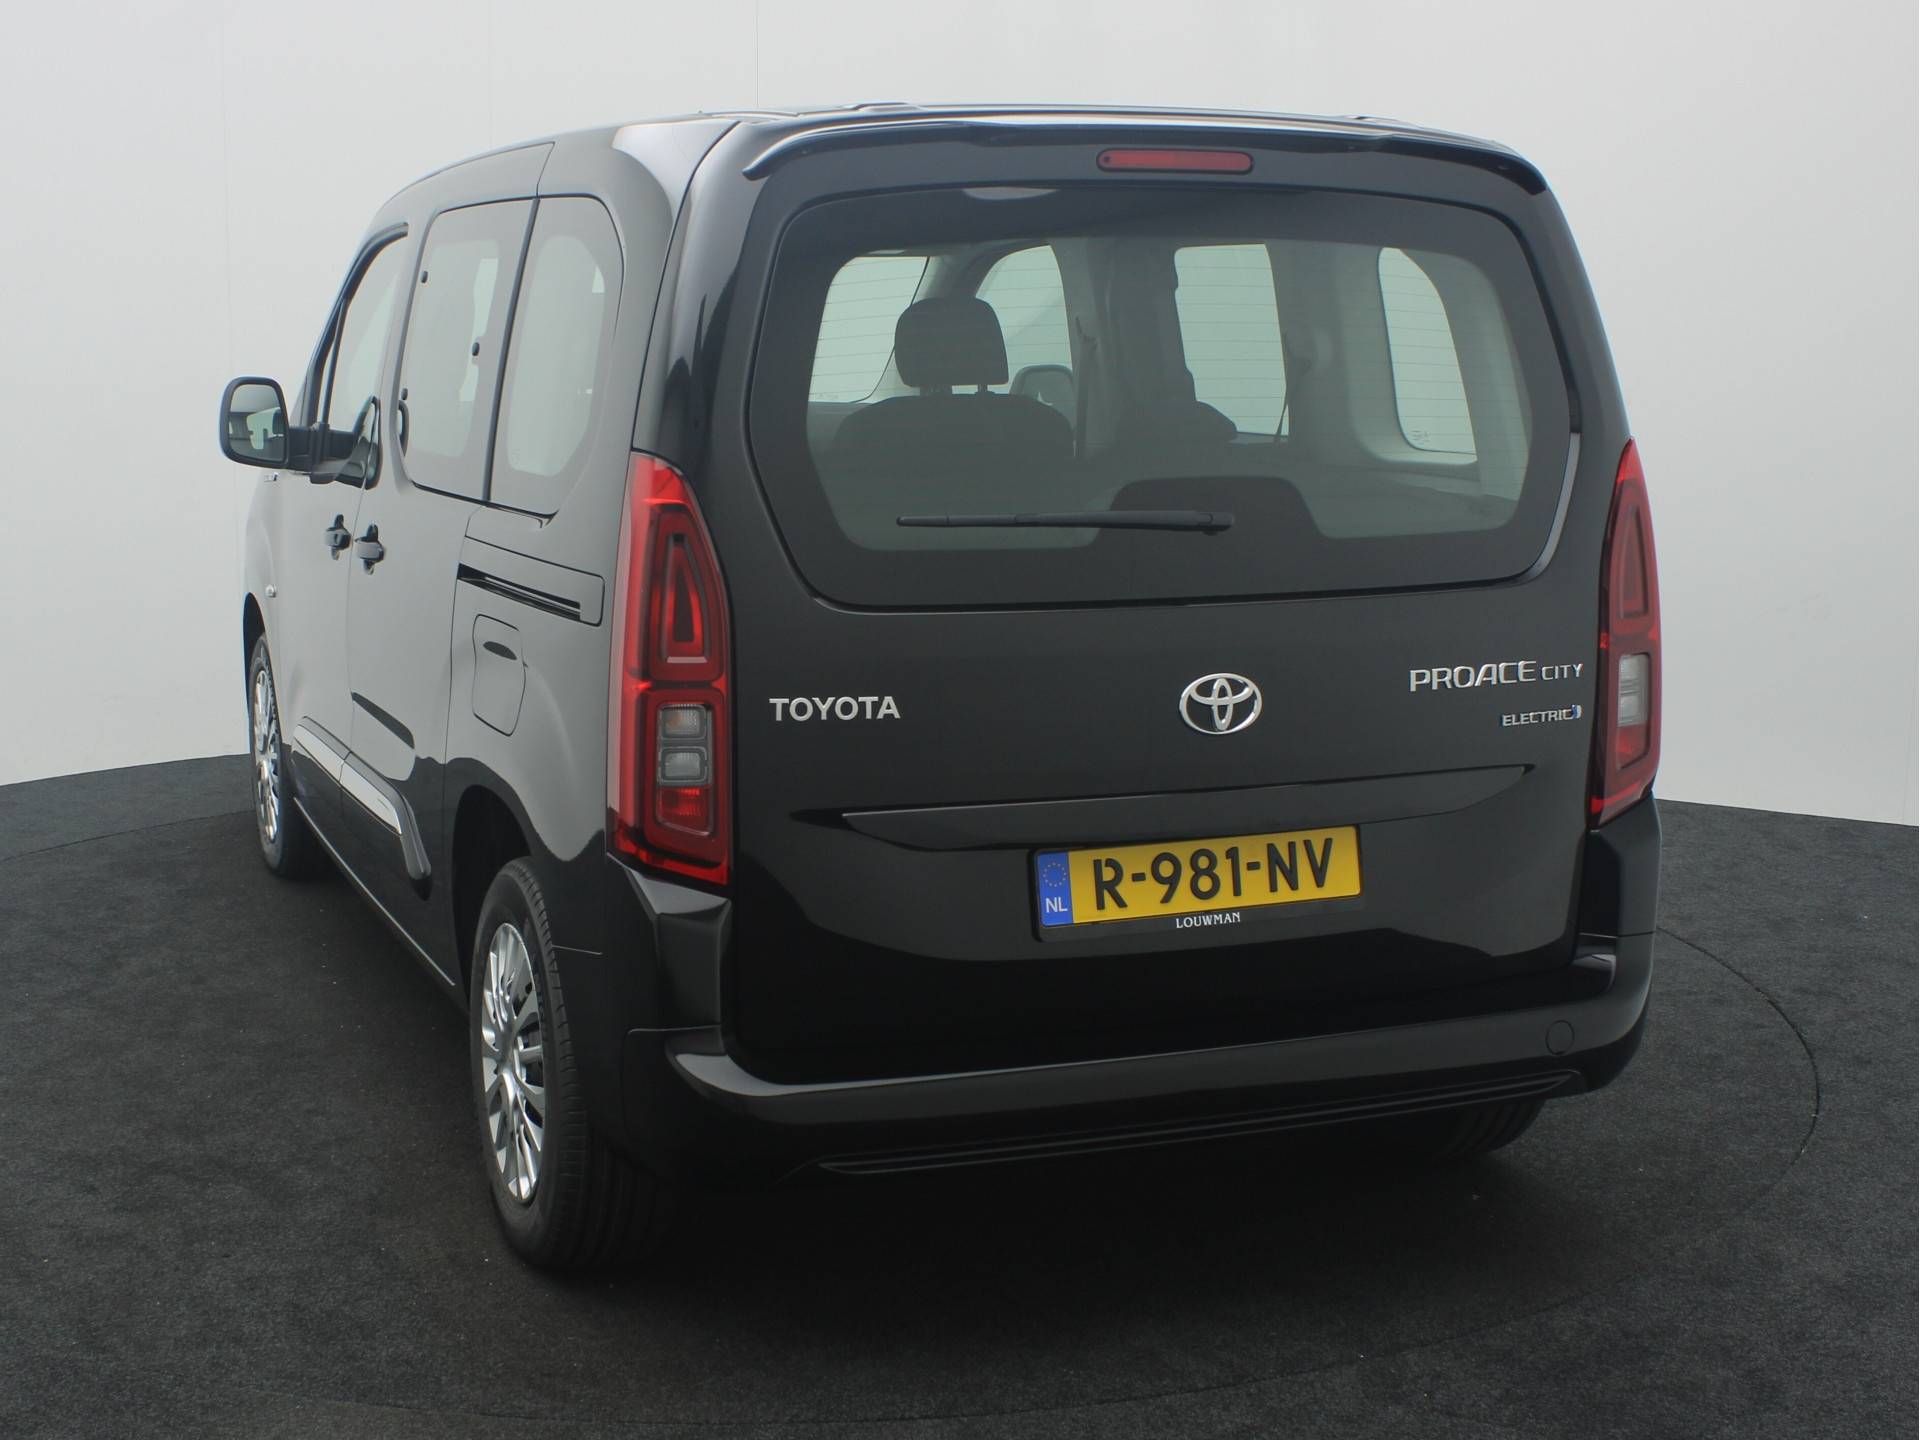 Toyota PROACE CITY Verso Electric 50kWh Live *Demo* | Navigatie | Cruise Control | Apple Carplay-Android Auto | vd zeeuw bouw - 13/39